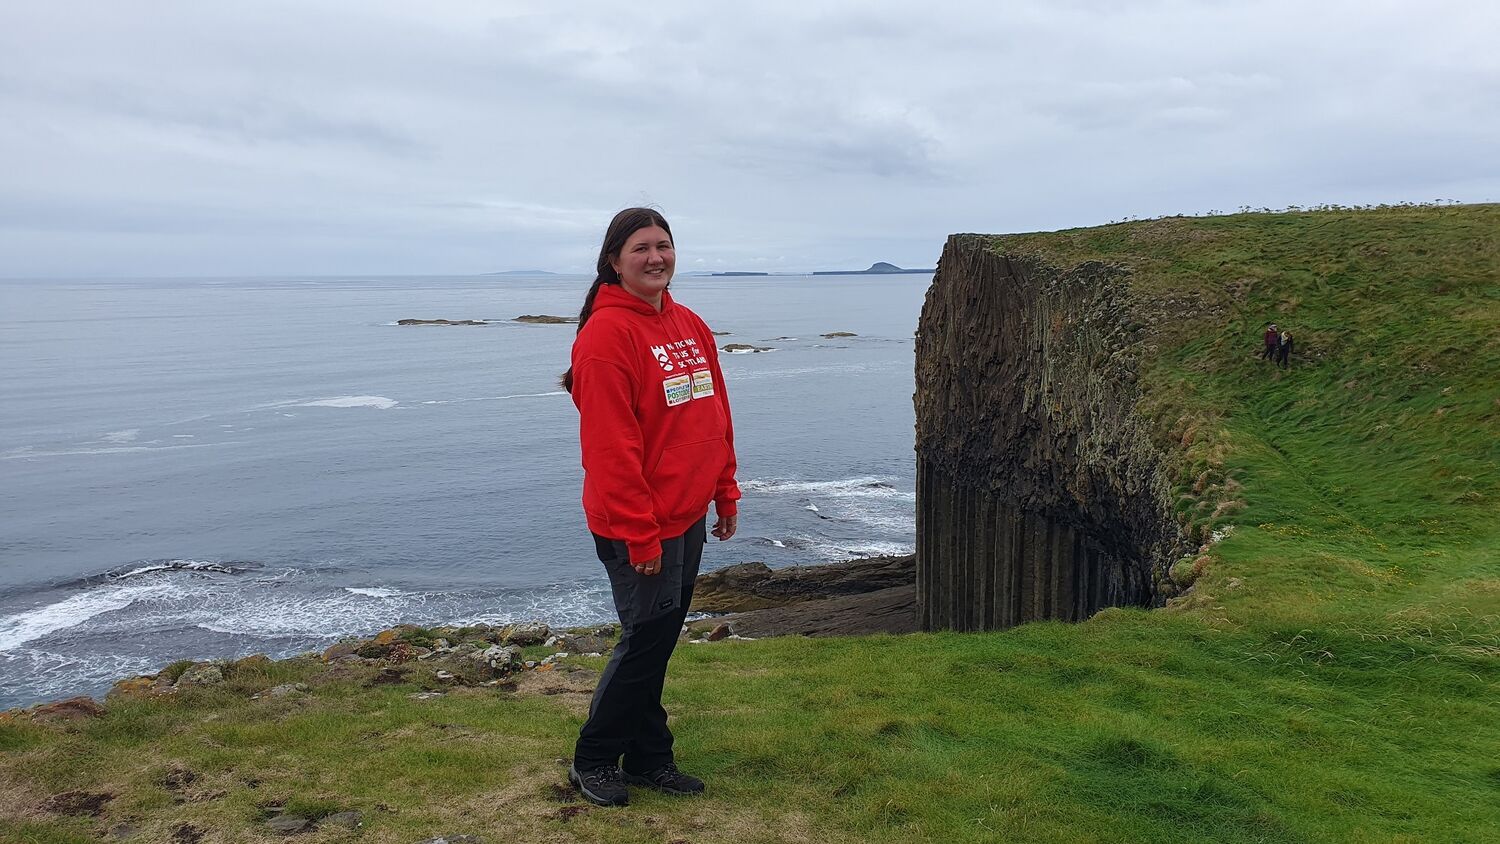 A young woman stands on a grassy clifftop, with the sea beneath her. She wears a bright red t-shirt.